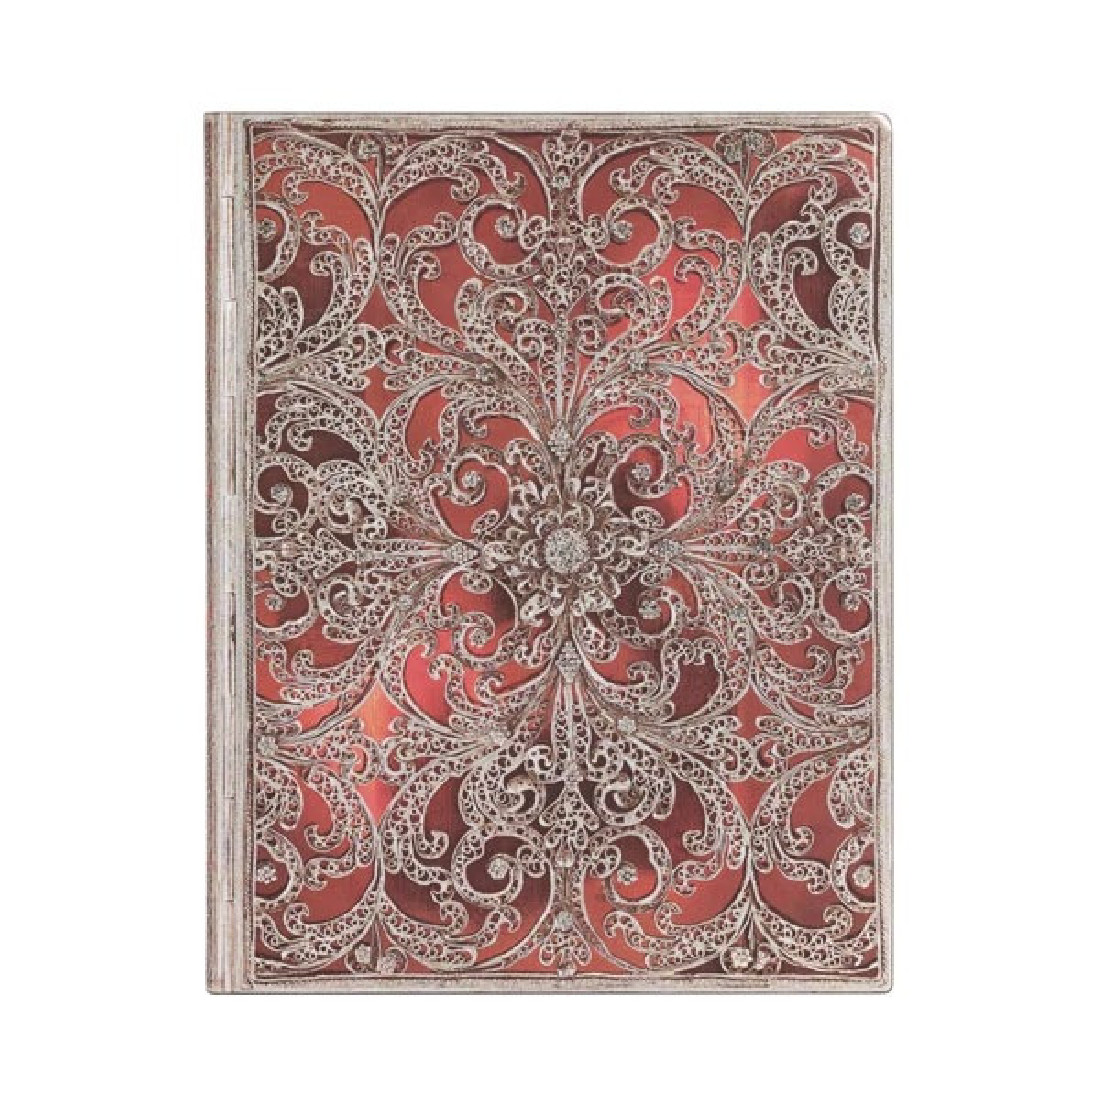 Paperblanks softcover notebook Ultra 18x23, Silver Filigree, Garnet, Lined, 176 pages, 100g.